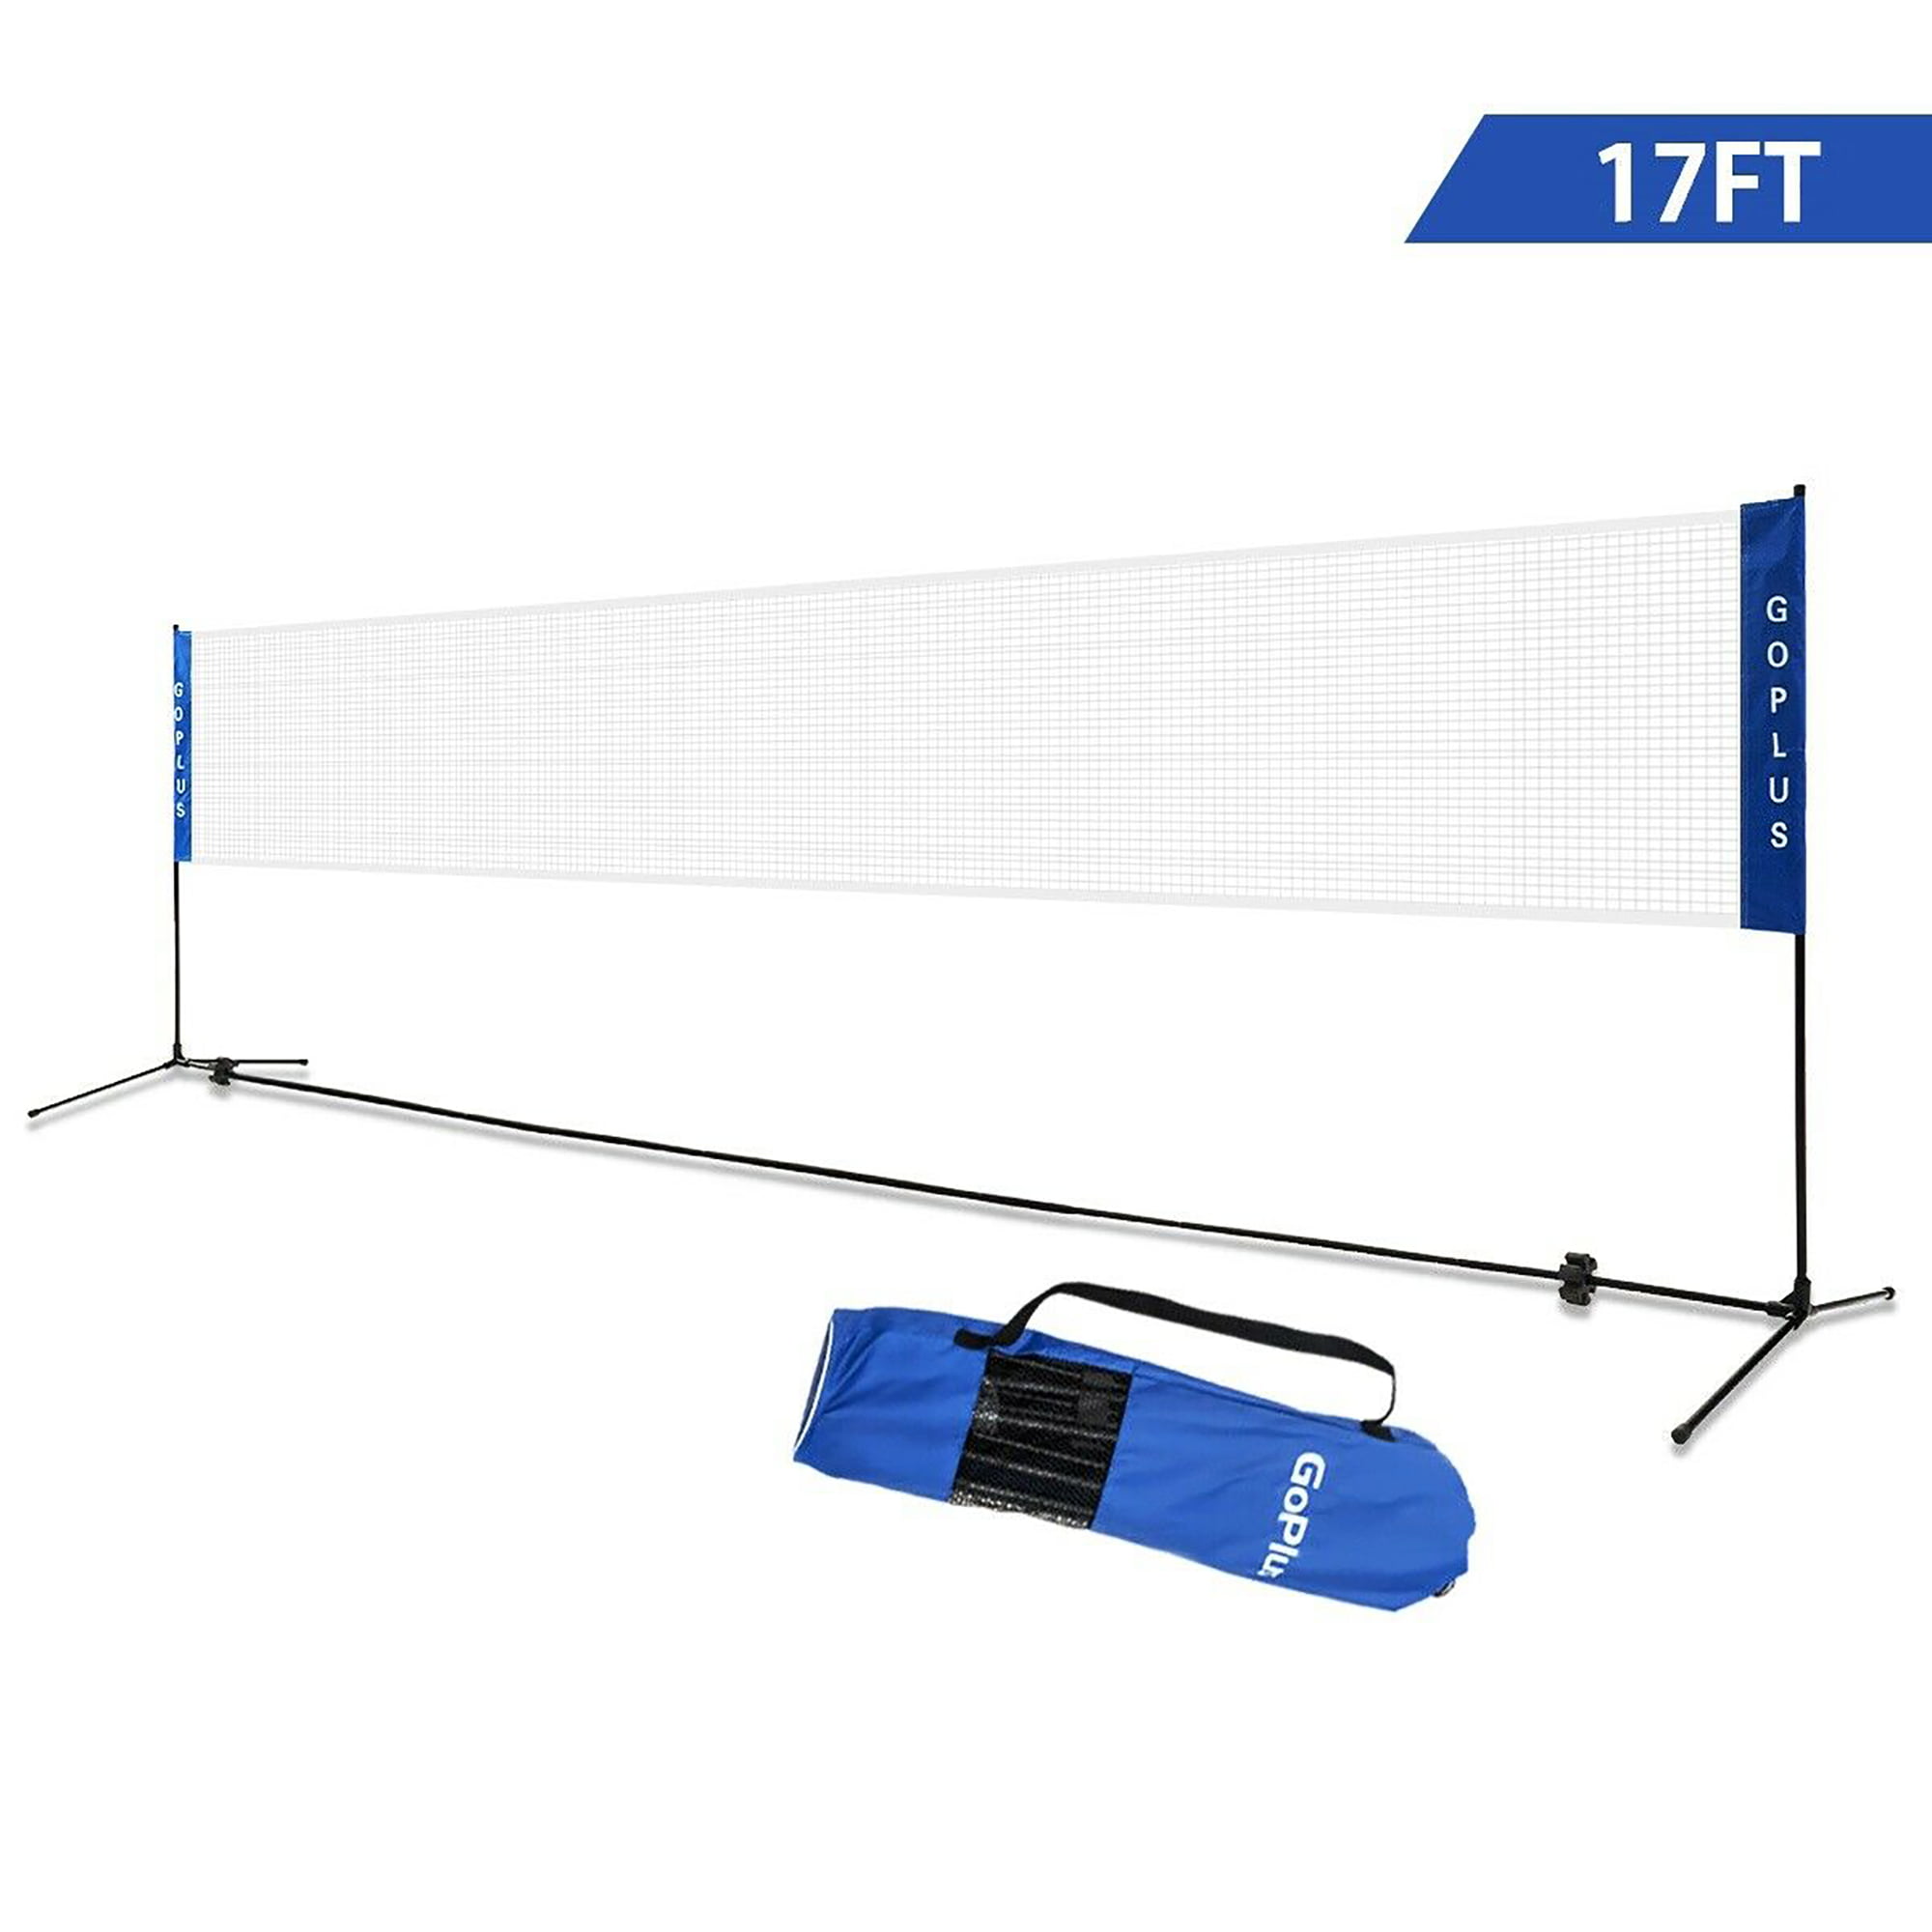 Details about   Volleyball Tennis Net Set with Stand Frame Carry Bag 17 Feet Portable Badminton 